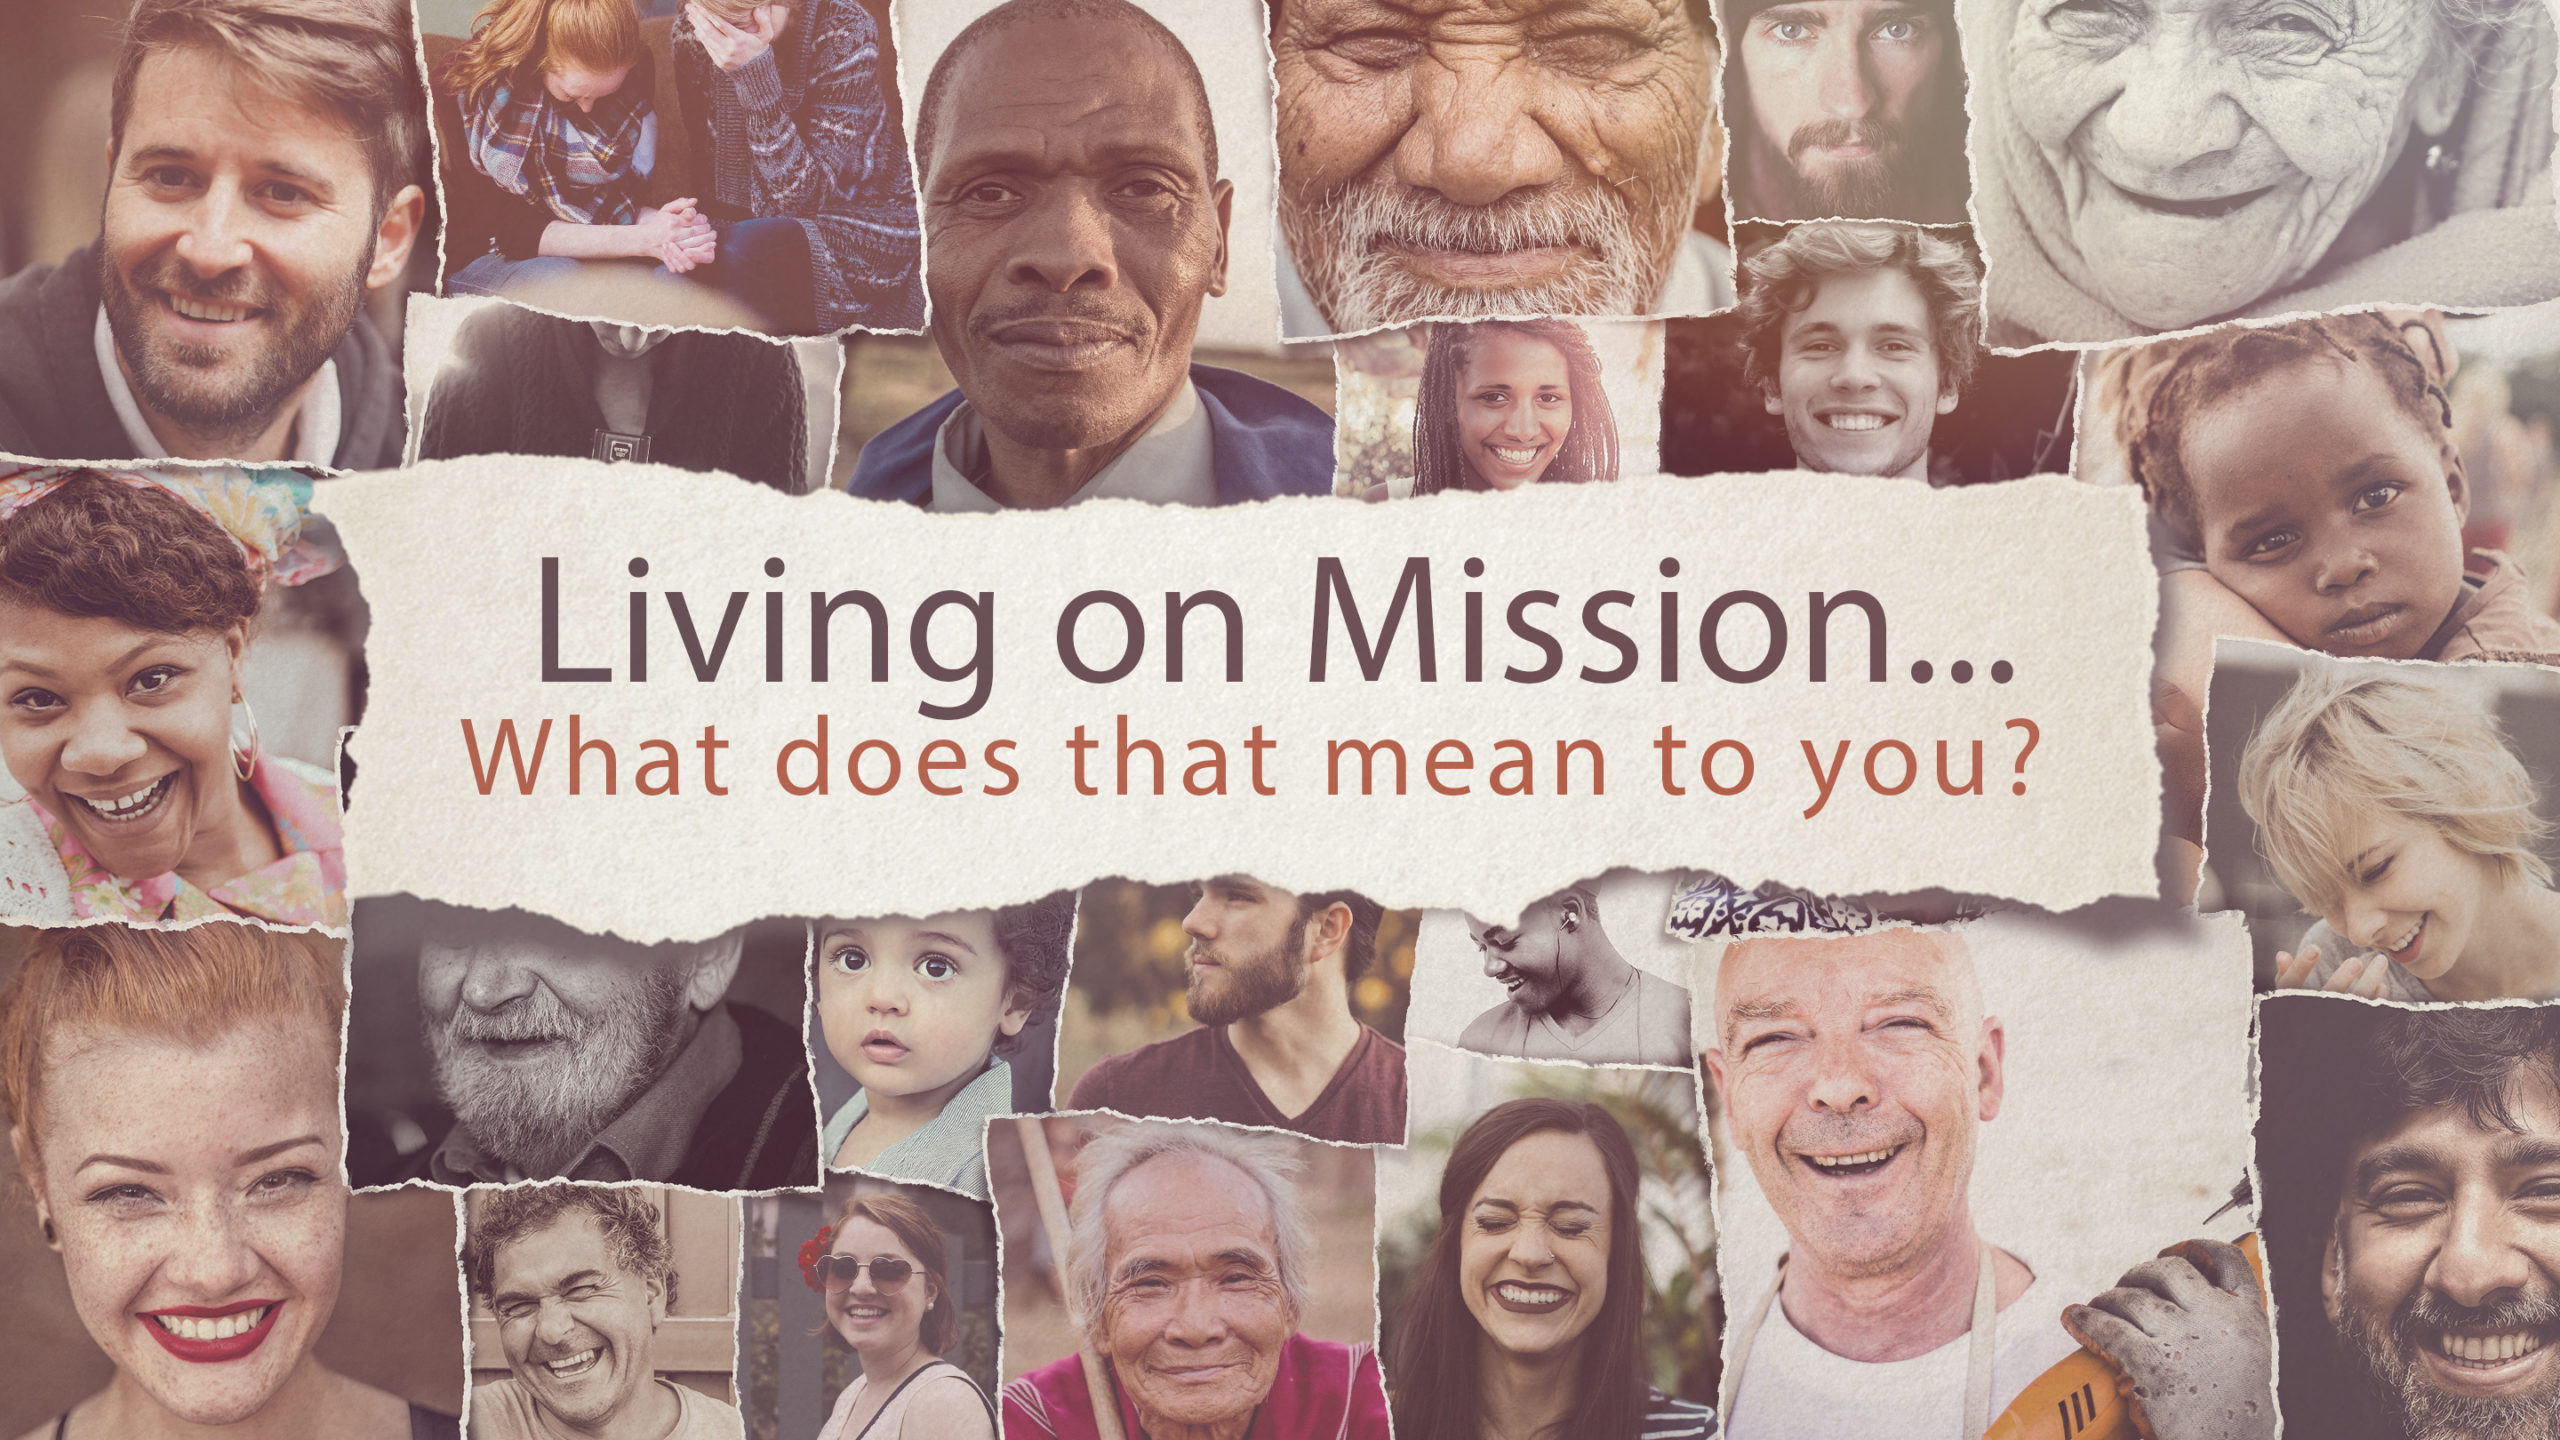 image of faces from around the world asking what does living on mission meand to you?